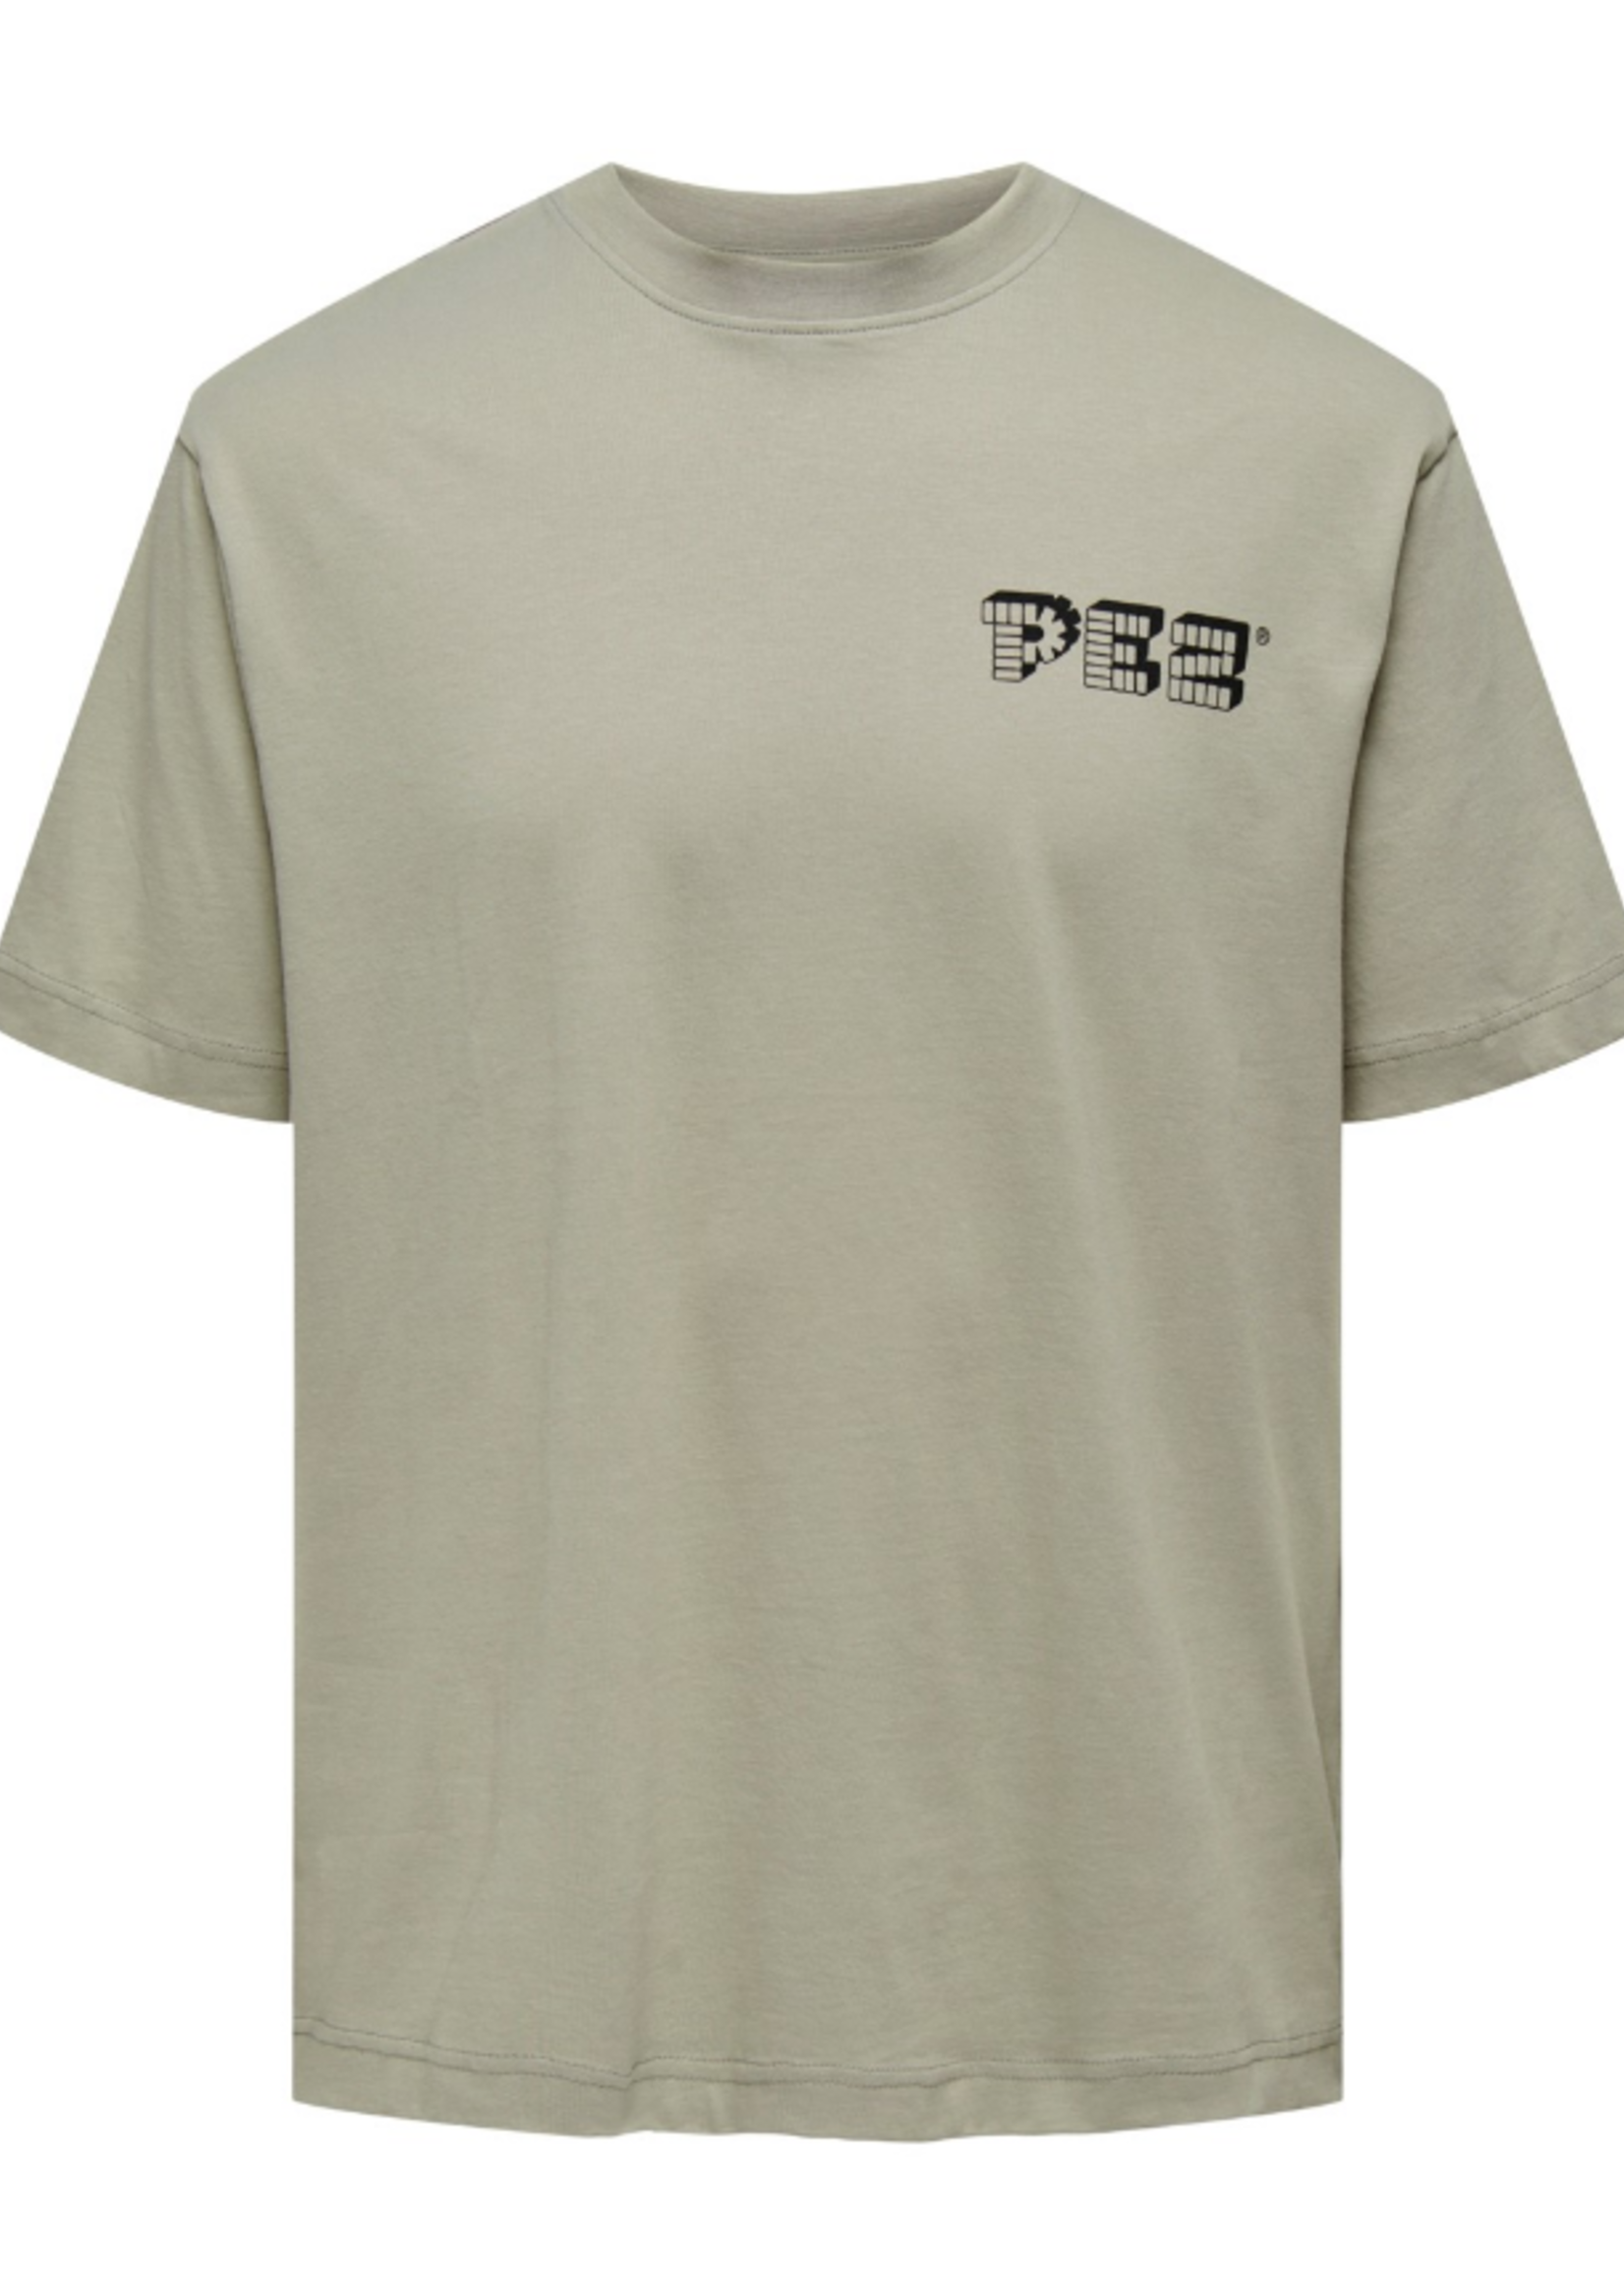 Only & Sons Pez Relaxed Tee Khaki